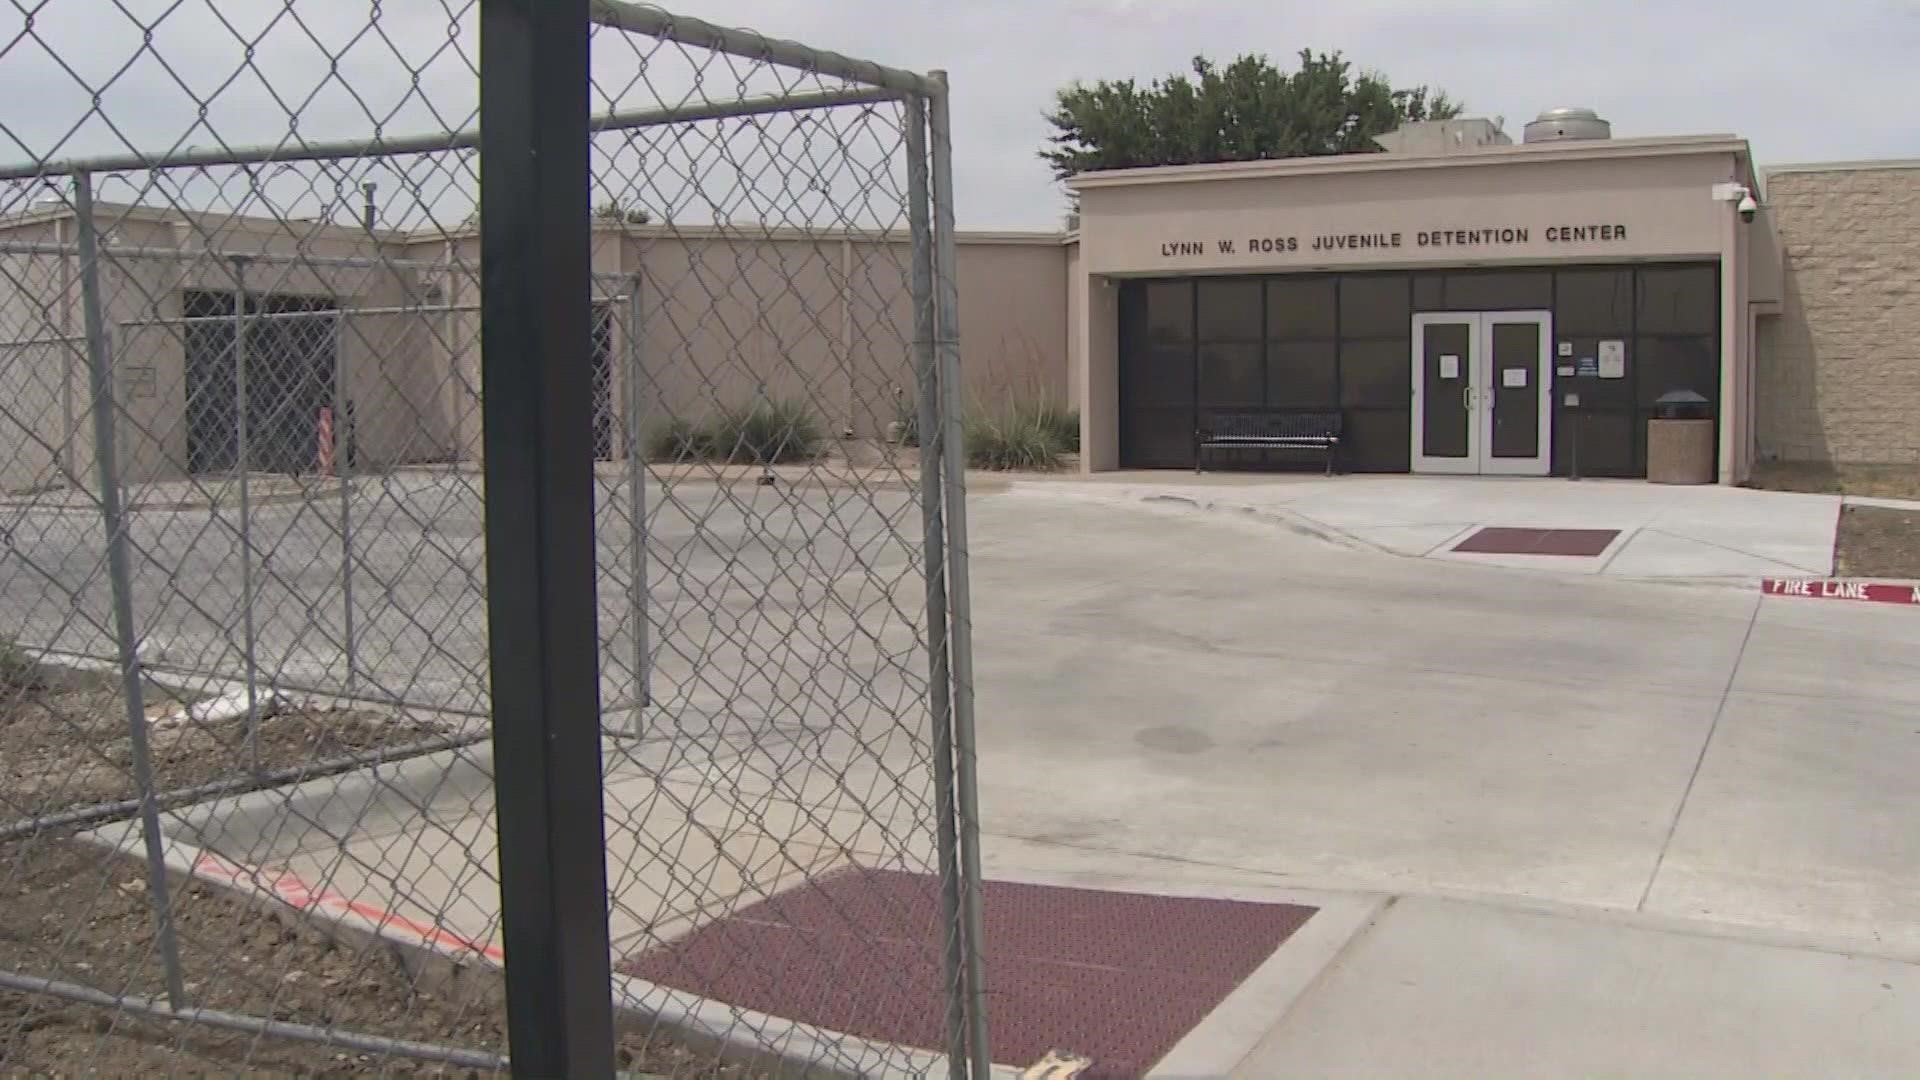 Tarrant County's Juvenile Detention Center has held children for nearly a year before pretrial hearings, according to a recent overcrowding report.